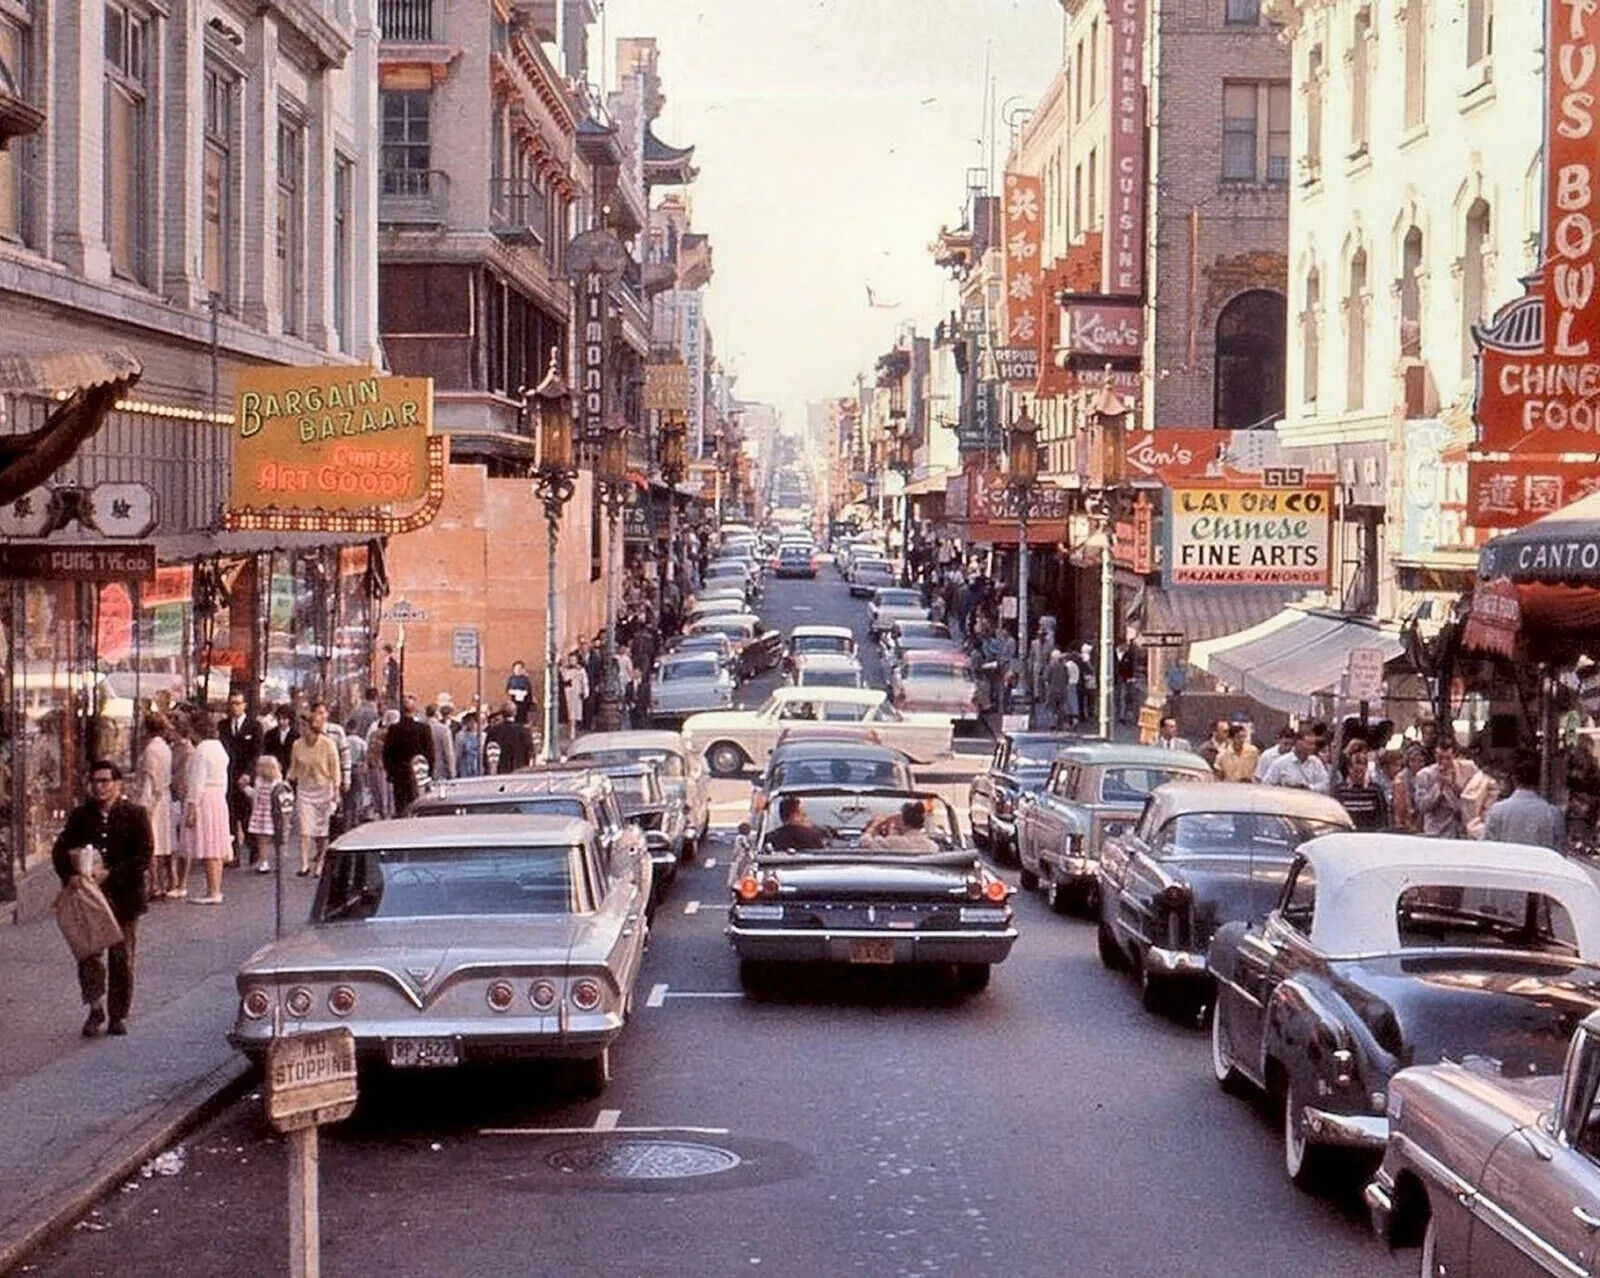 1961 CHINATOWN SAN FRANCISCO City Street with Classic Cars Poster Photo 13x19